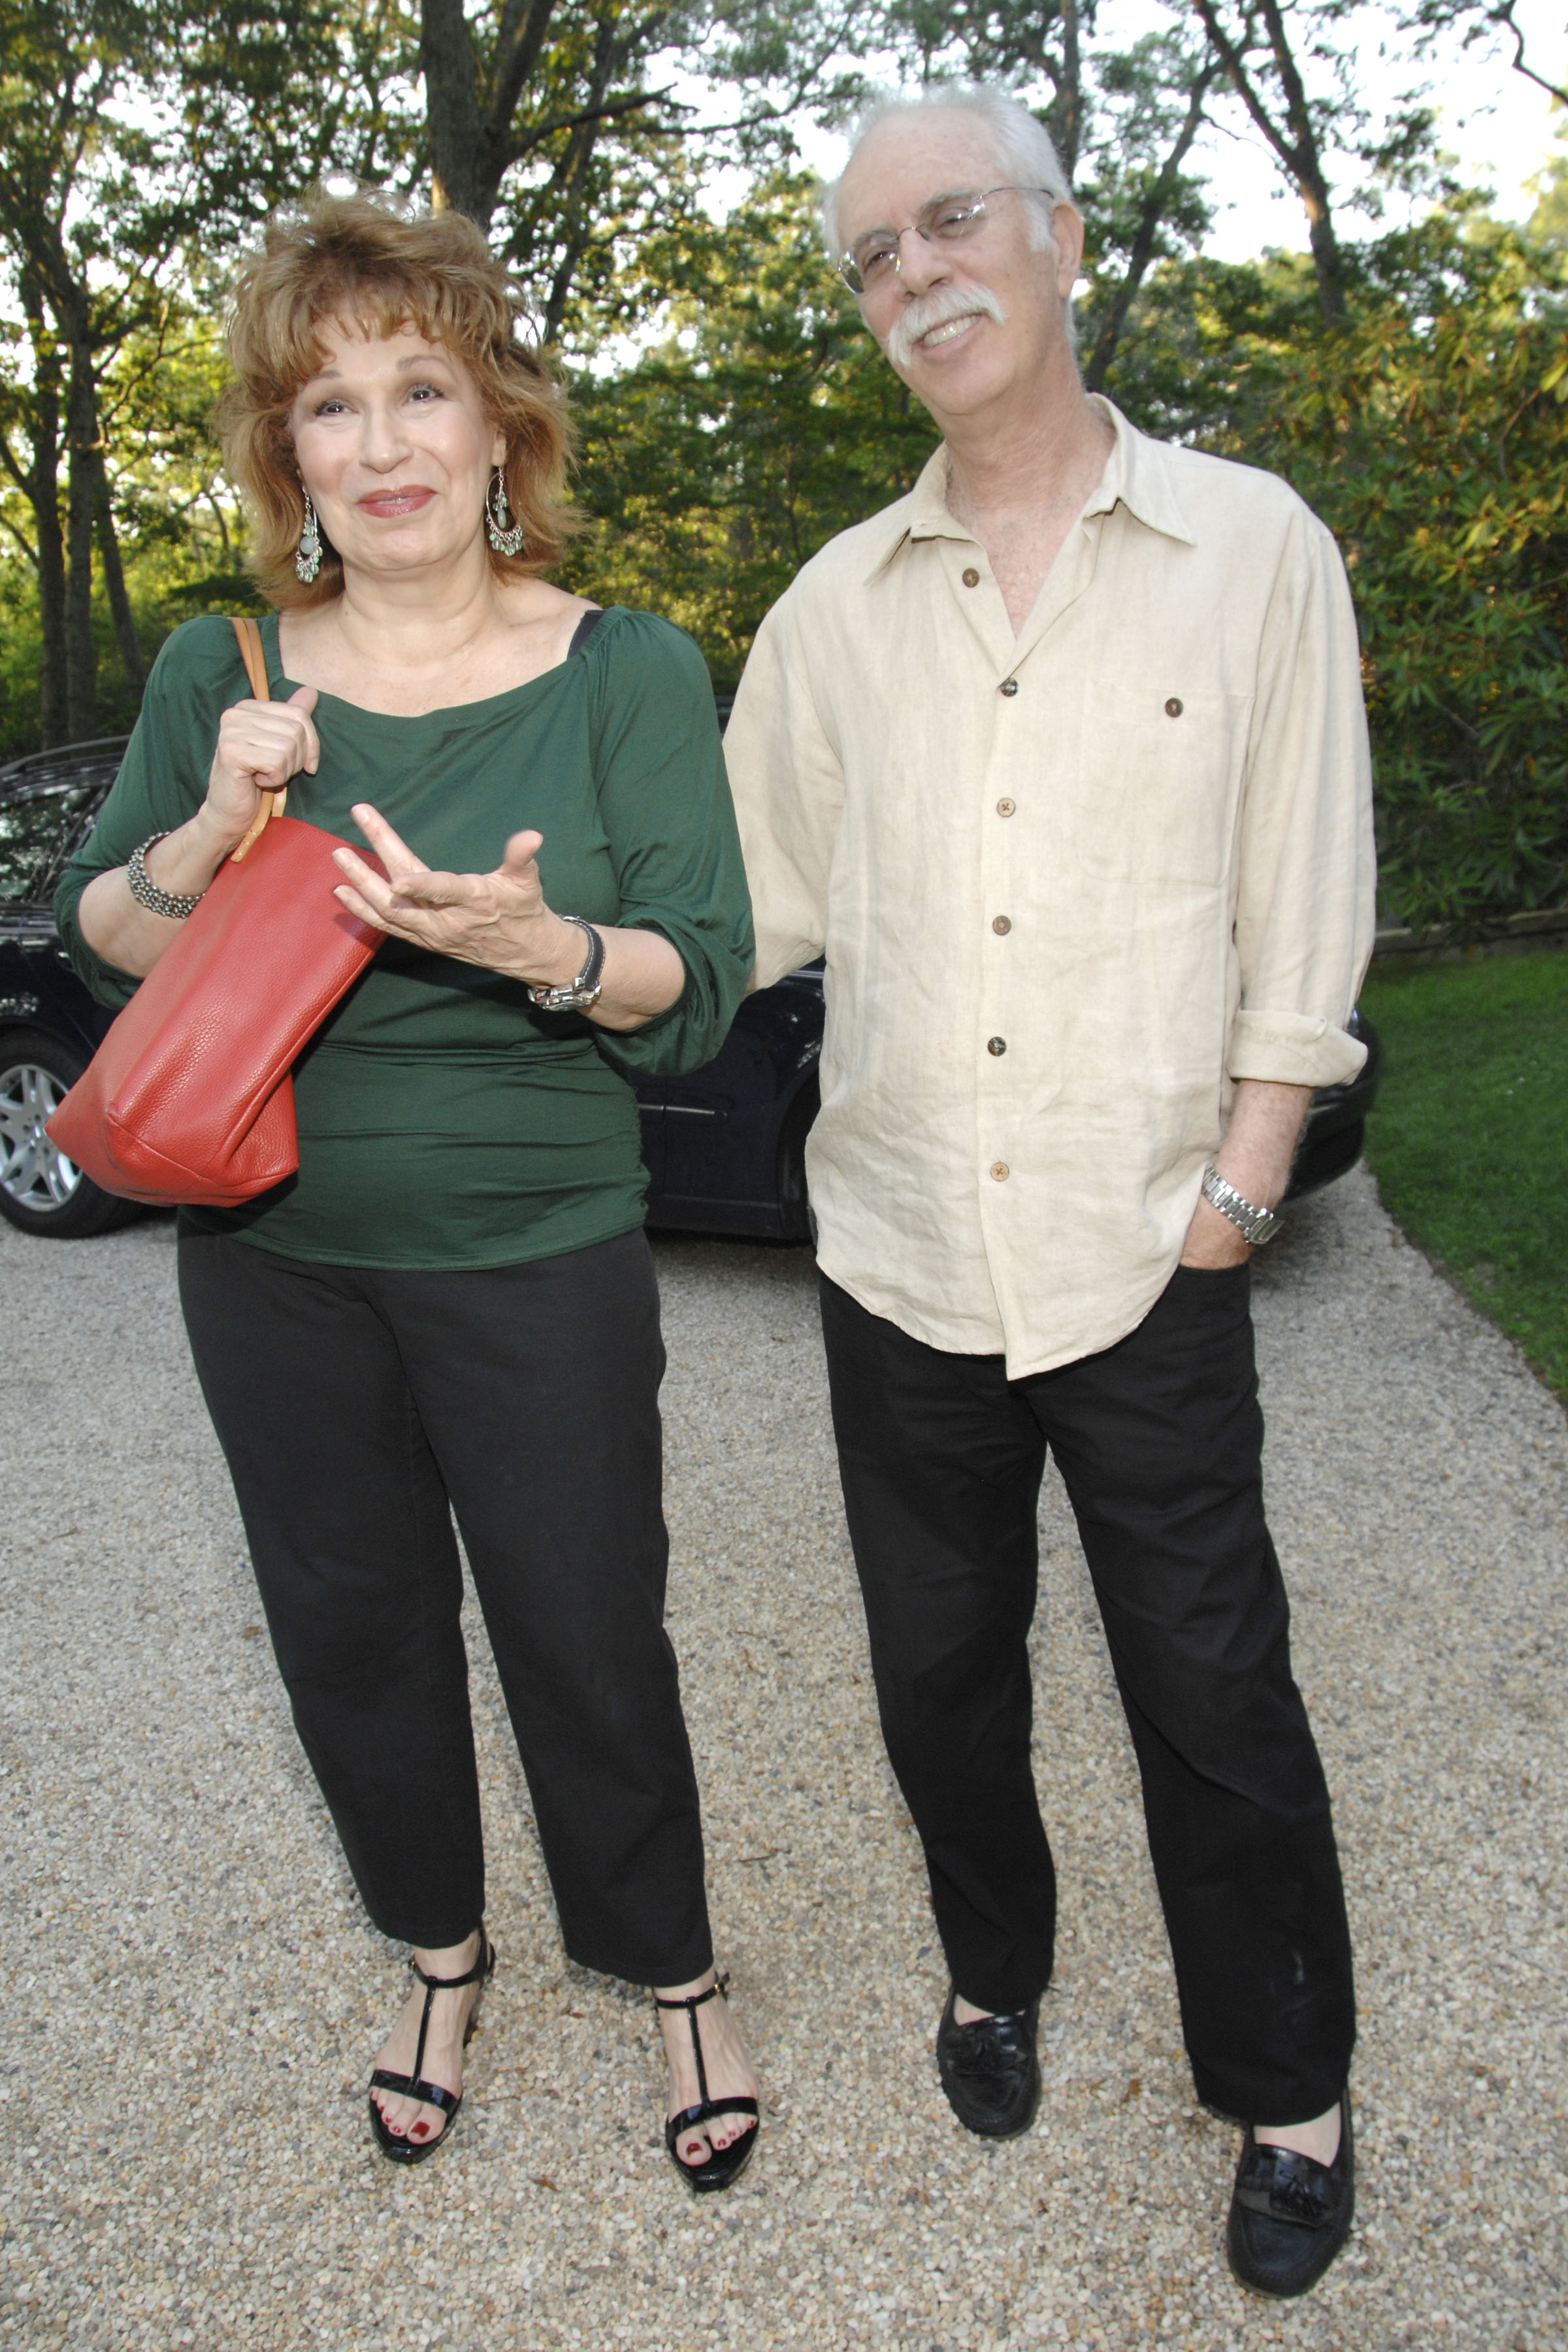 Joy Behar and Steve Janowitz at the screening of "My One and Only" in East Hampton at Goose Creek on August 15, 2009 in East Hampton, New York | Source: Getty Images